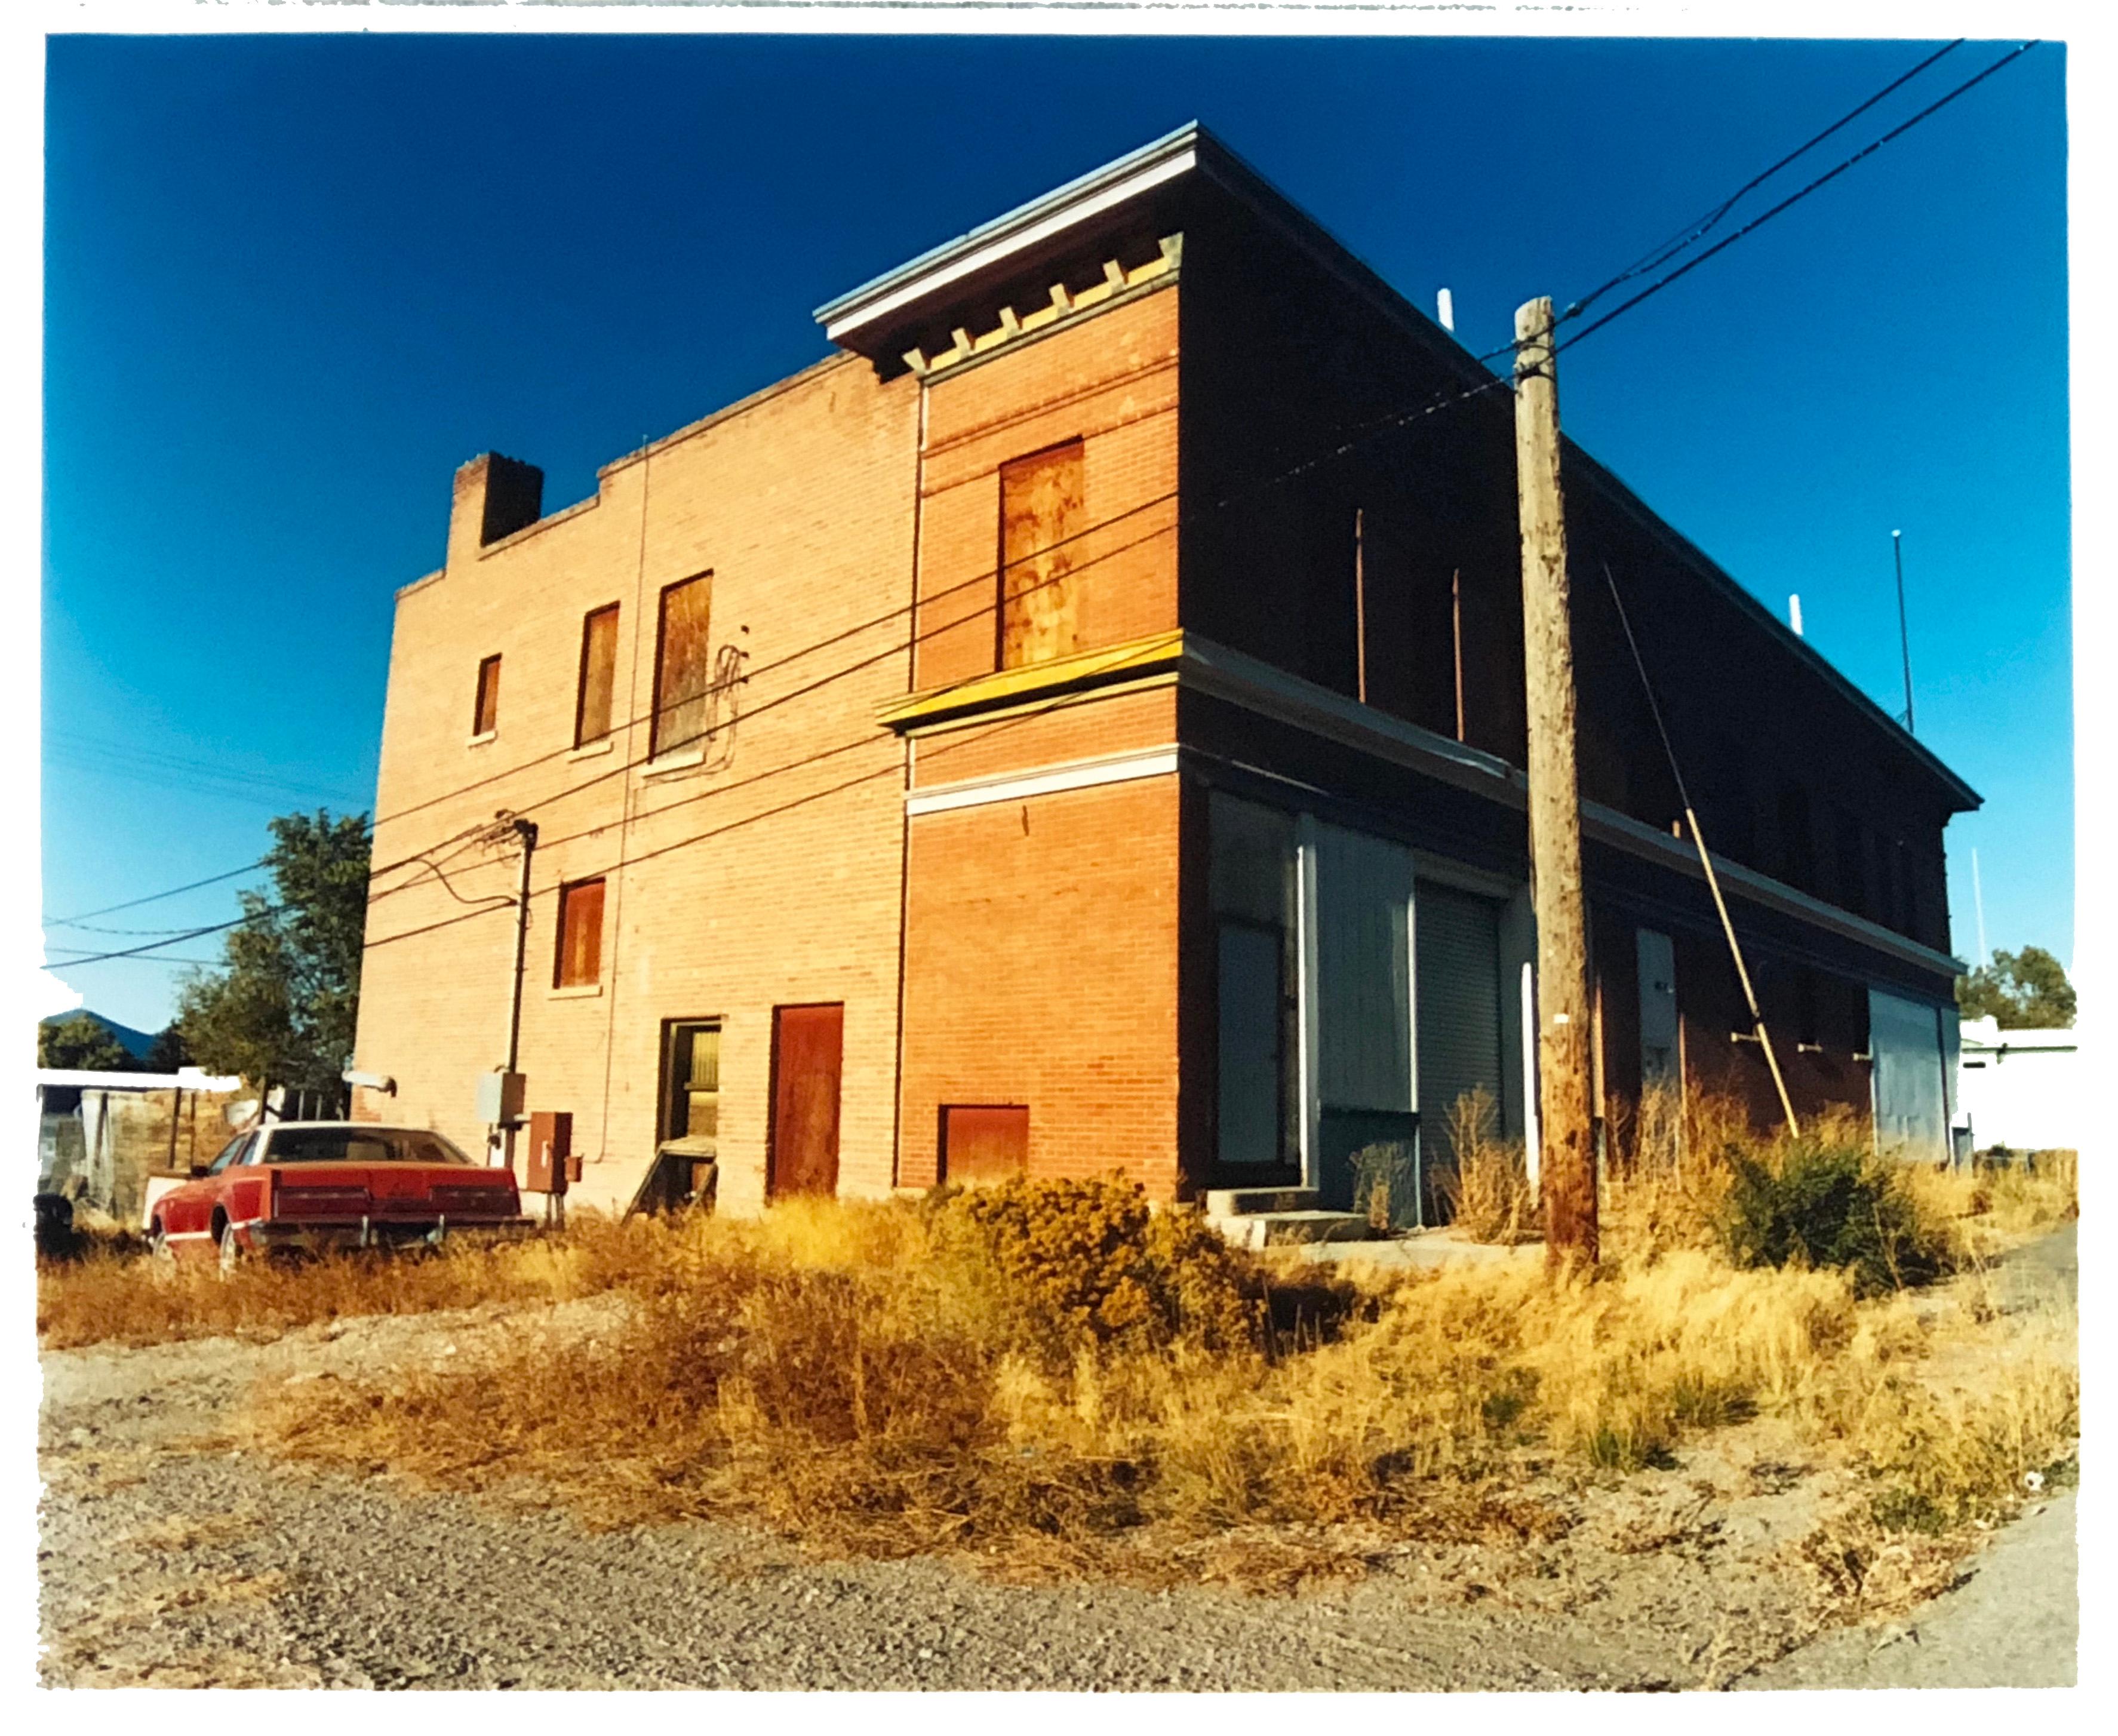 Richard Heeps Print - 'High Street', Ely, Nevada - After the Gold Rush - Architecture Color Photo